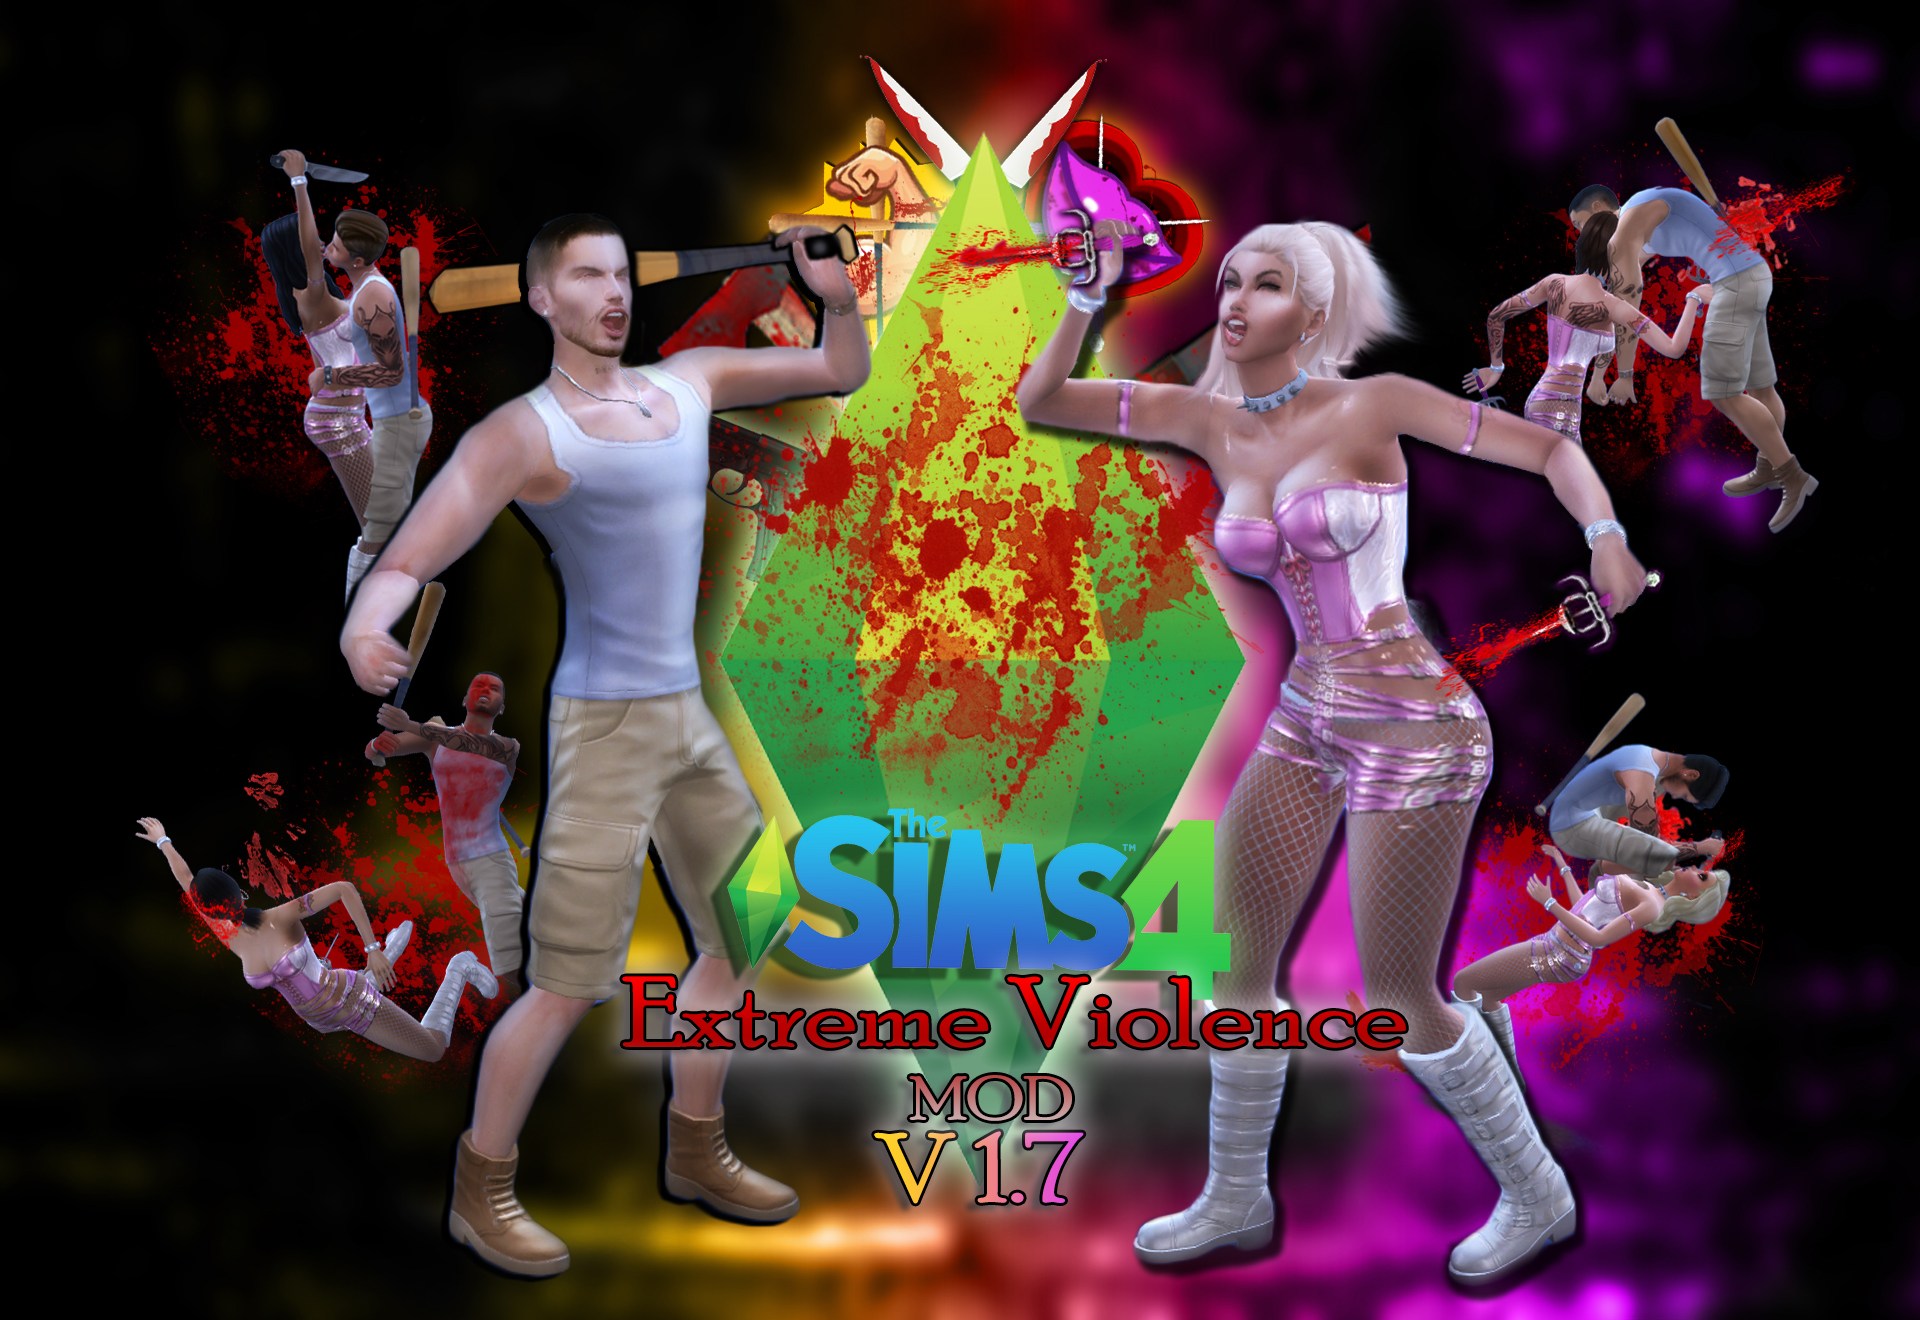 work prostitute mod sims 4 free download